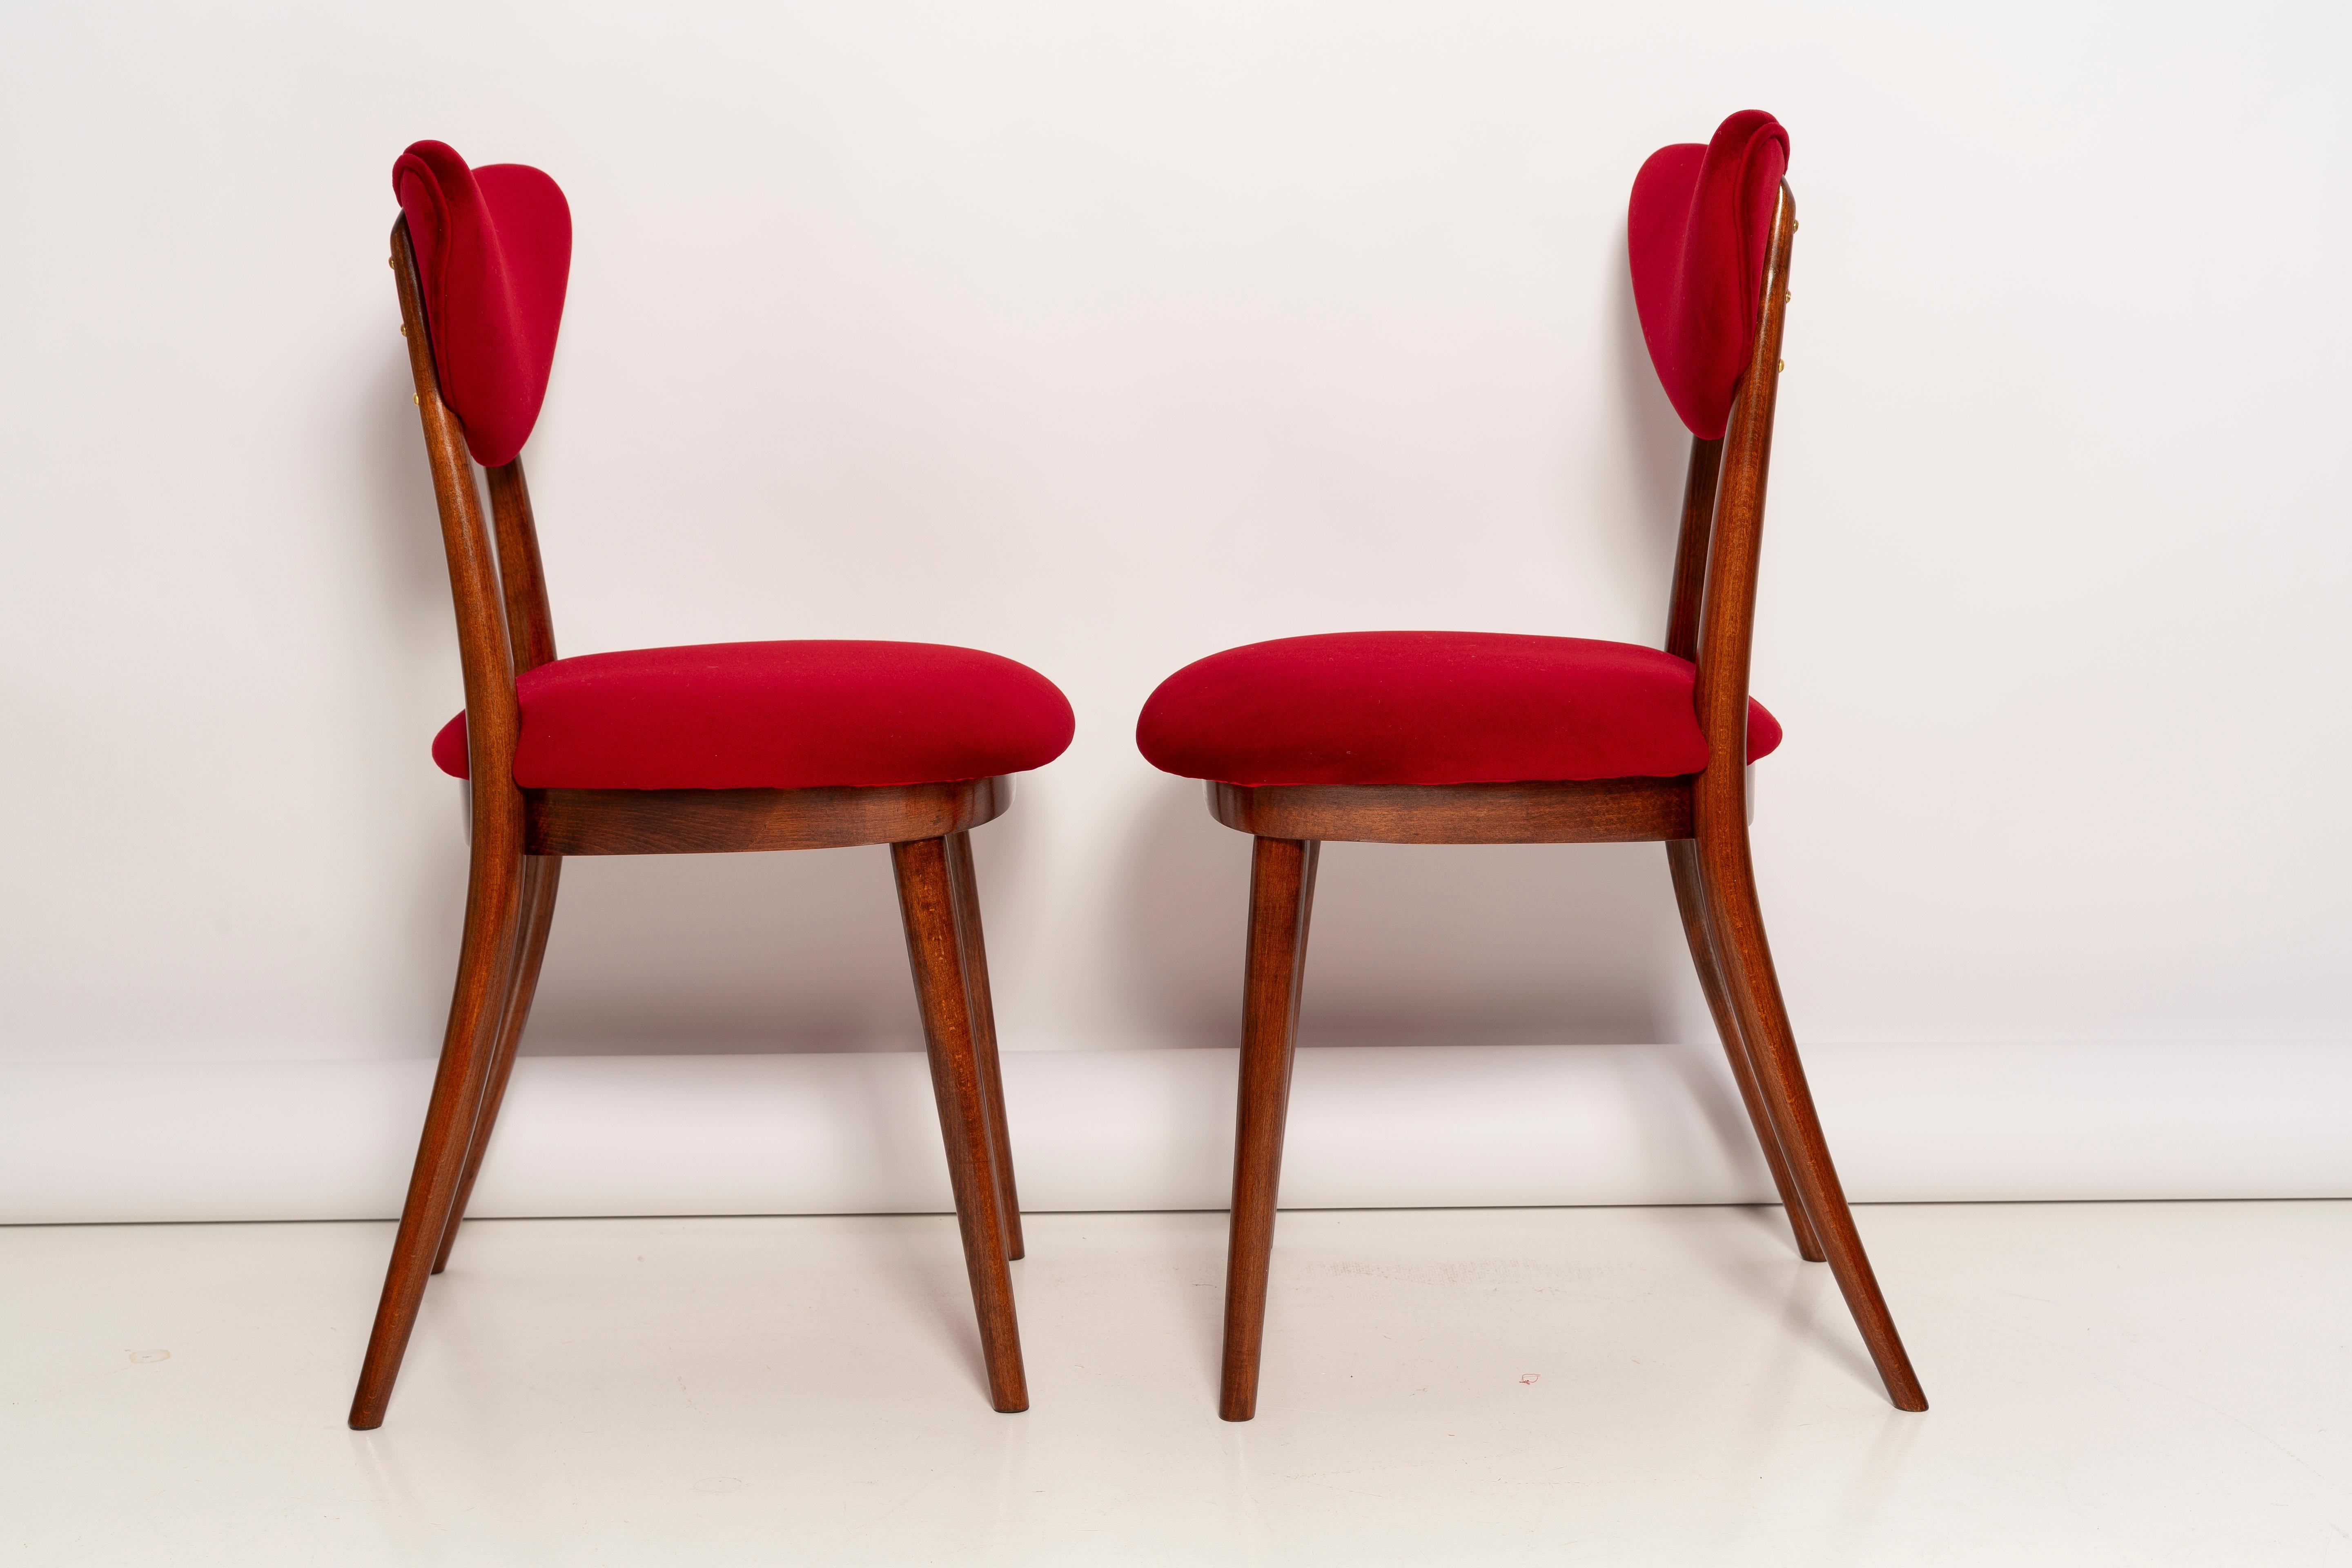 Hand-Crafted Pair of Mid Century Red Heart Chairs, Poland, 1960s For Sale